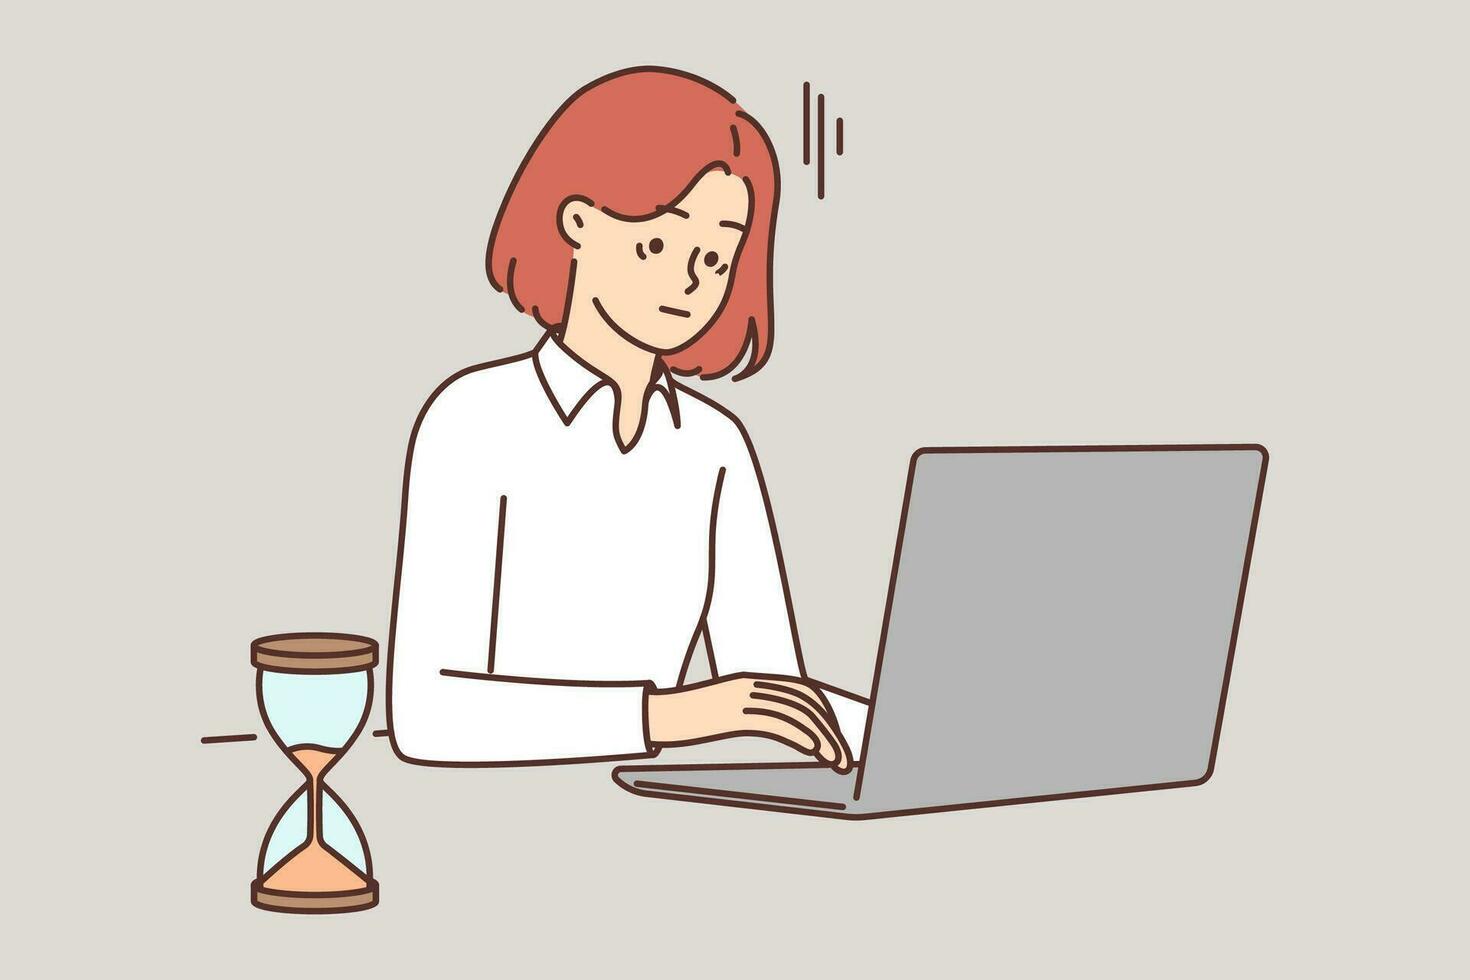 Tired woman with laptop works in office sitting near hourglass symbolizing tough deadlines. Tired businesswoman experiencing mood problems due to overwork and overload associated with strict deadlines vector